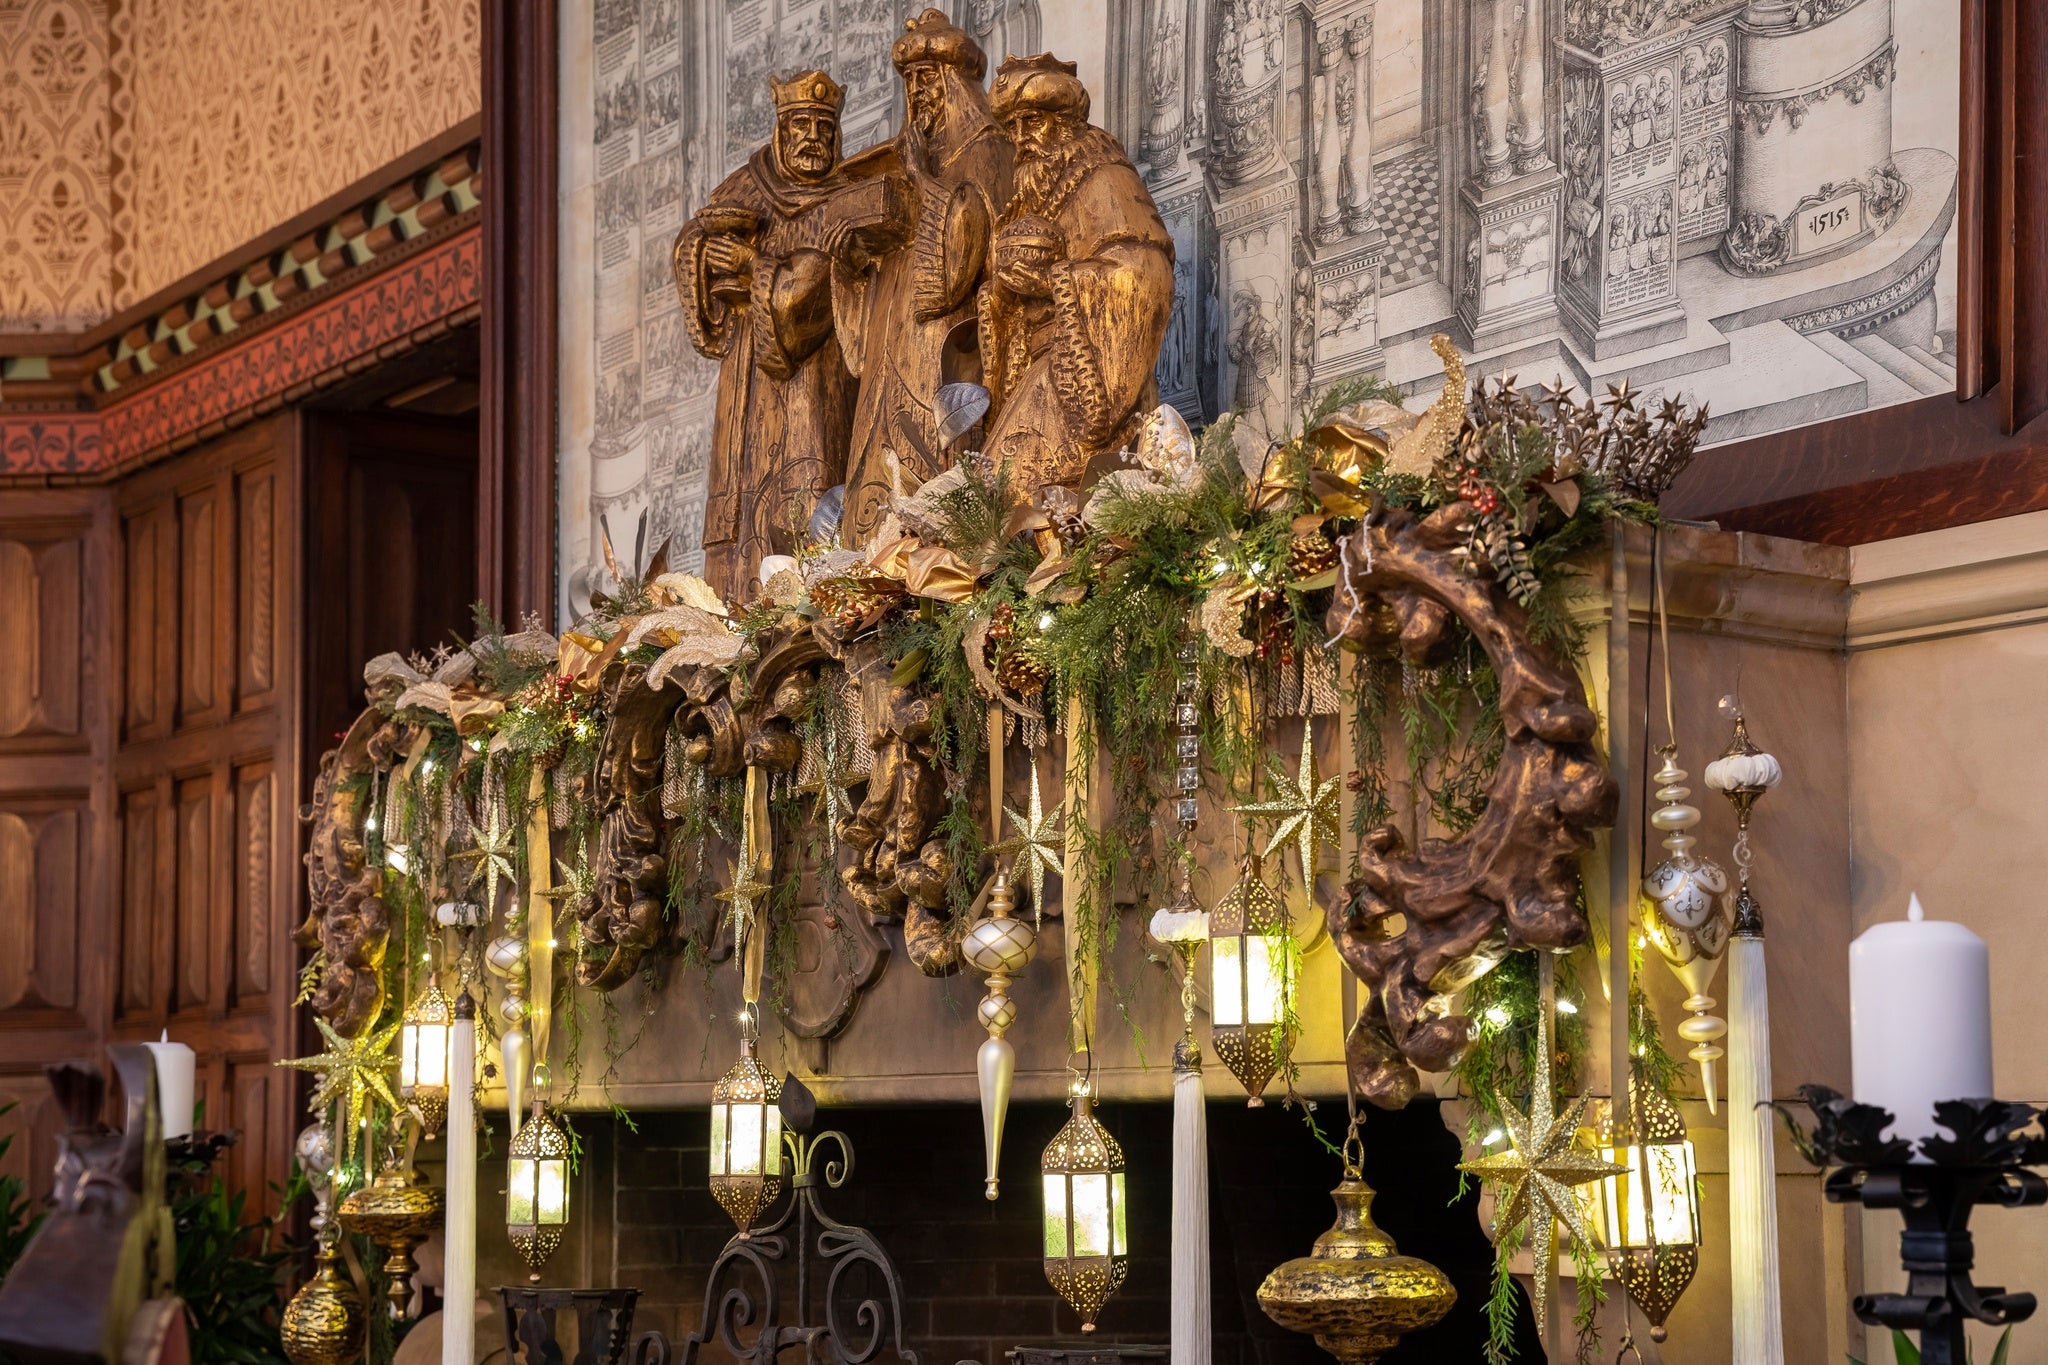 Christmas decorations on the mantel in the Music Room of Biltmore House